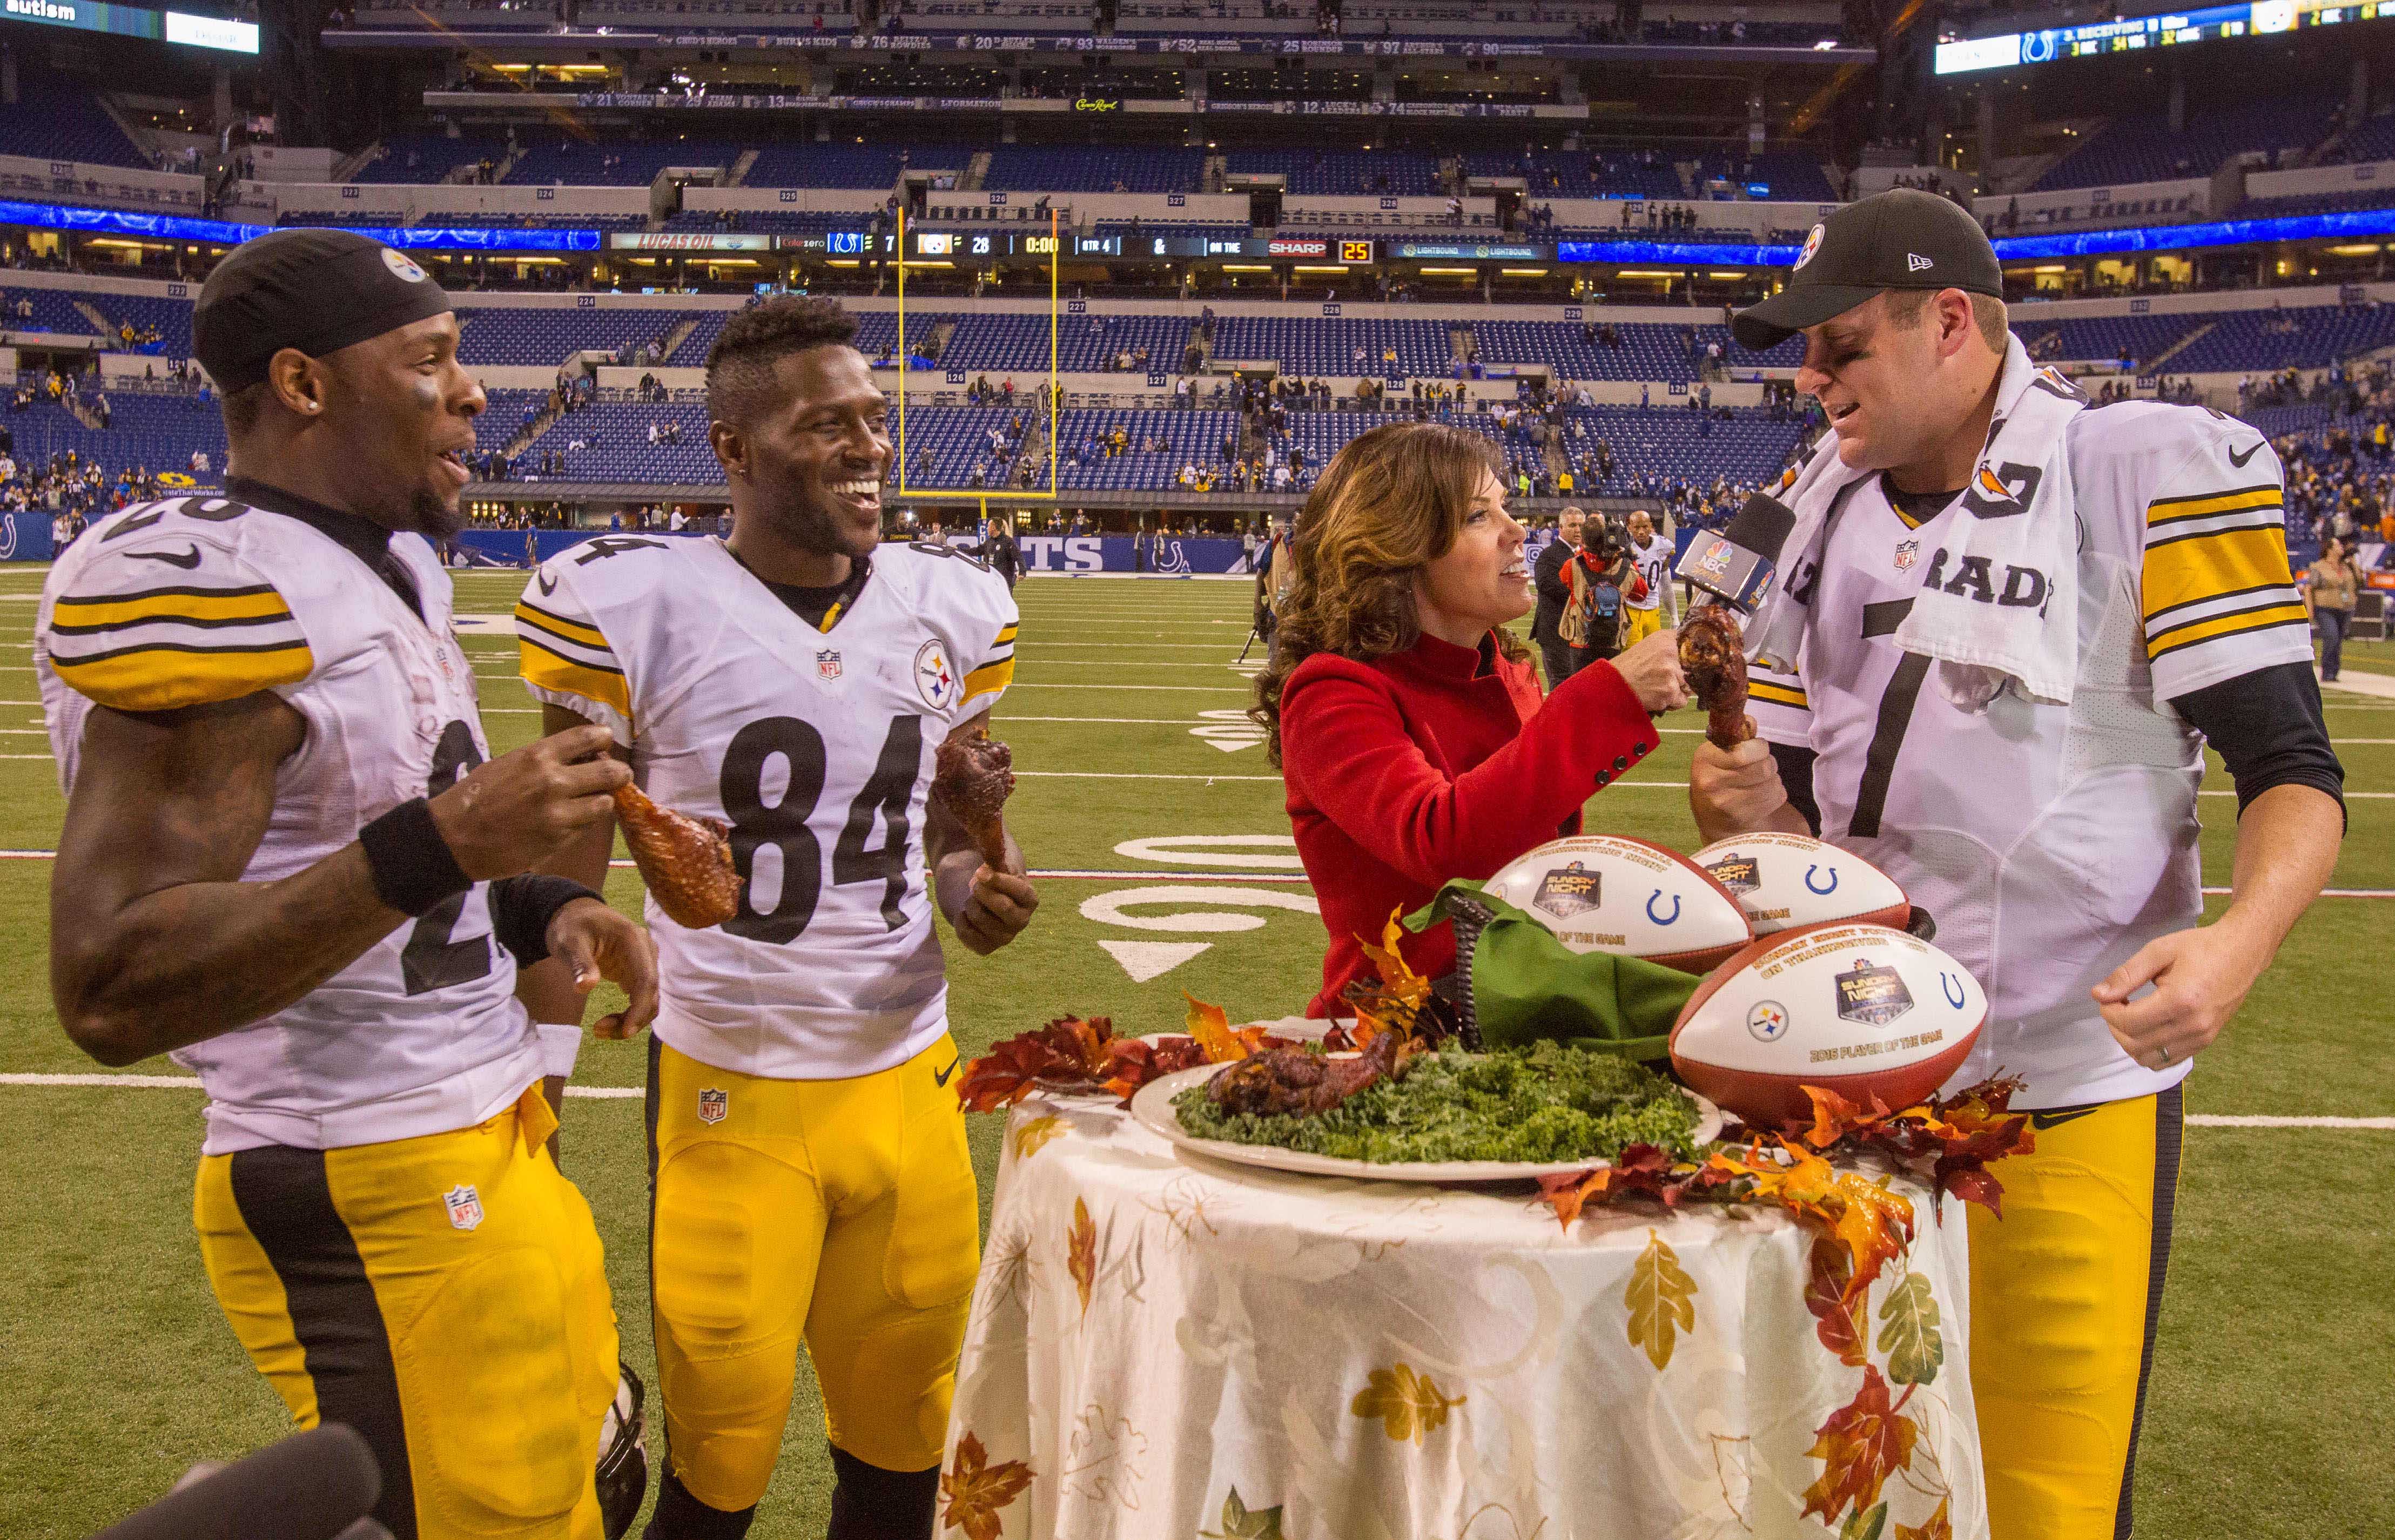 Celebrate Thanksgiving with these NFL players eating turkey